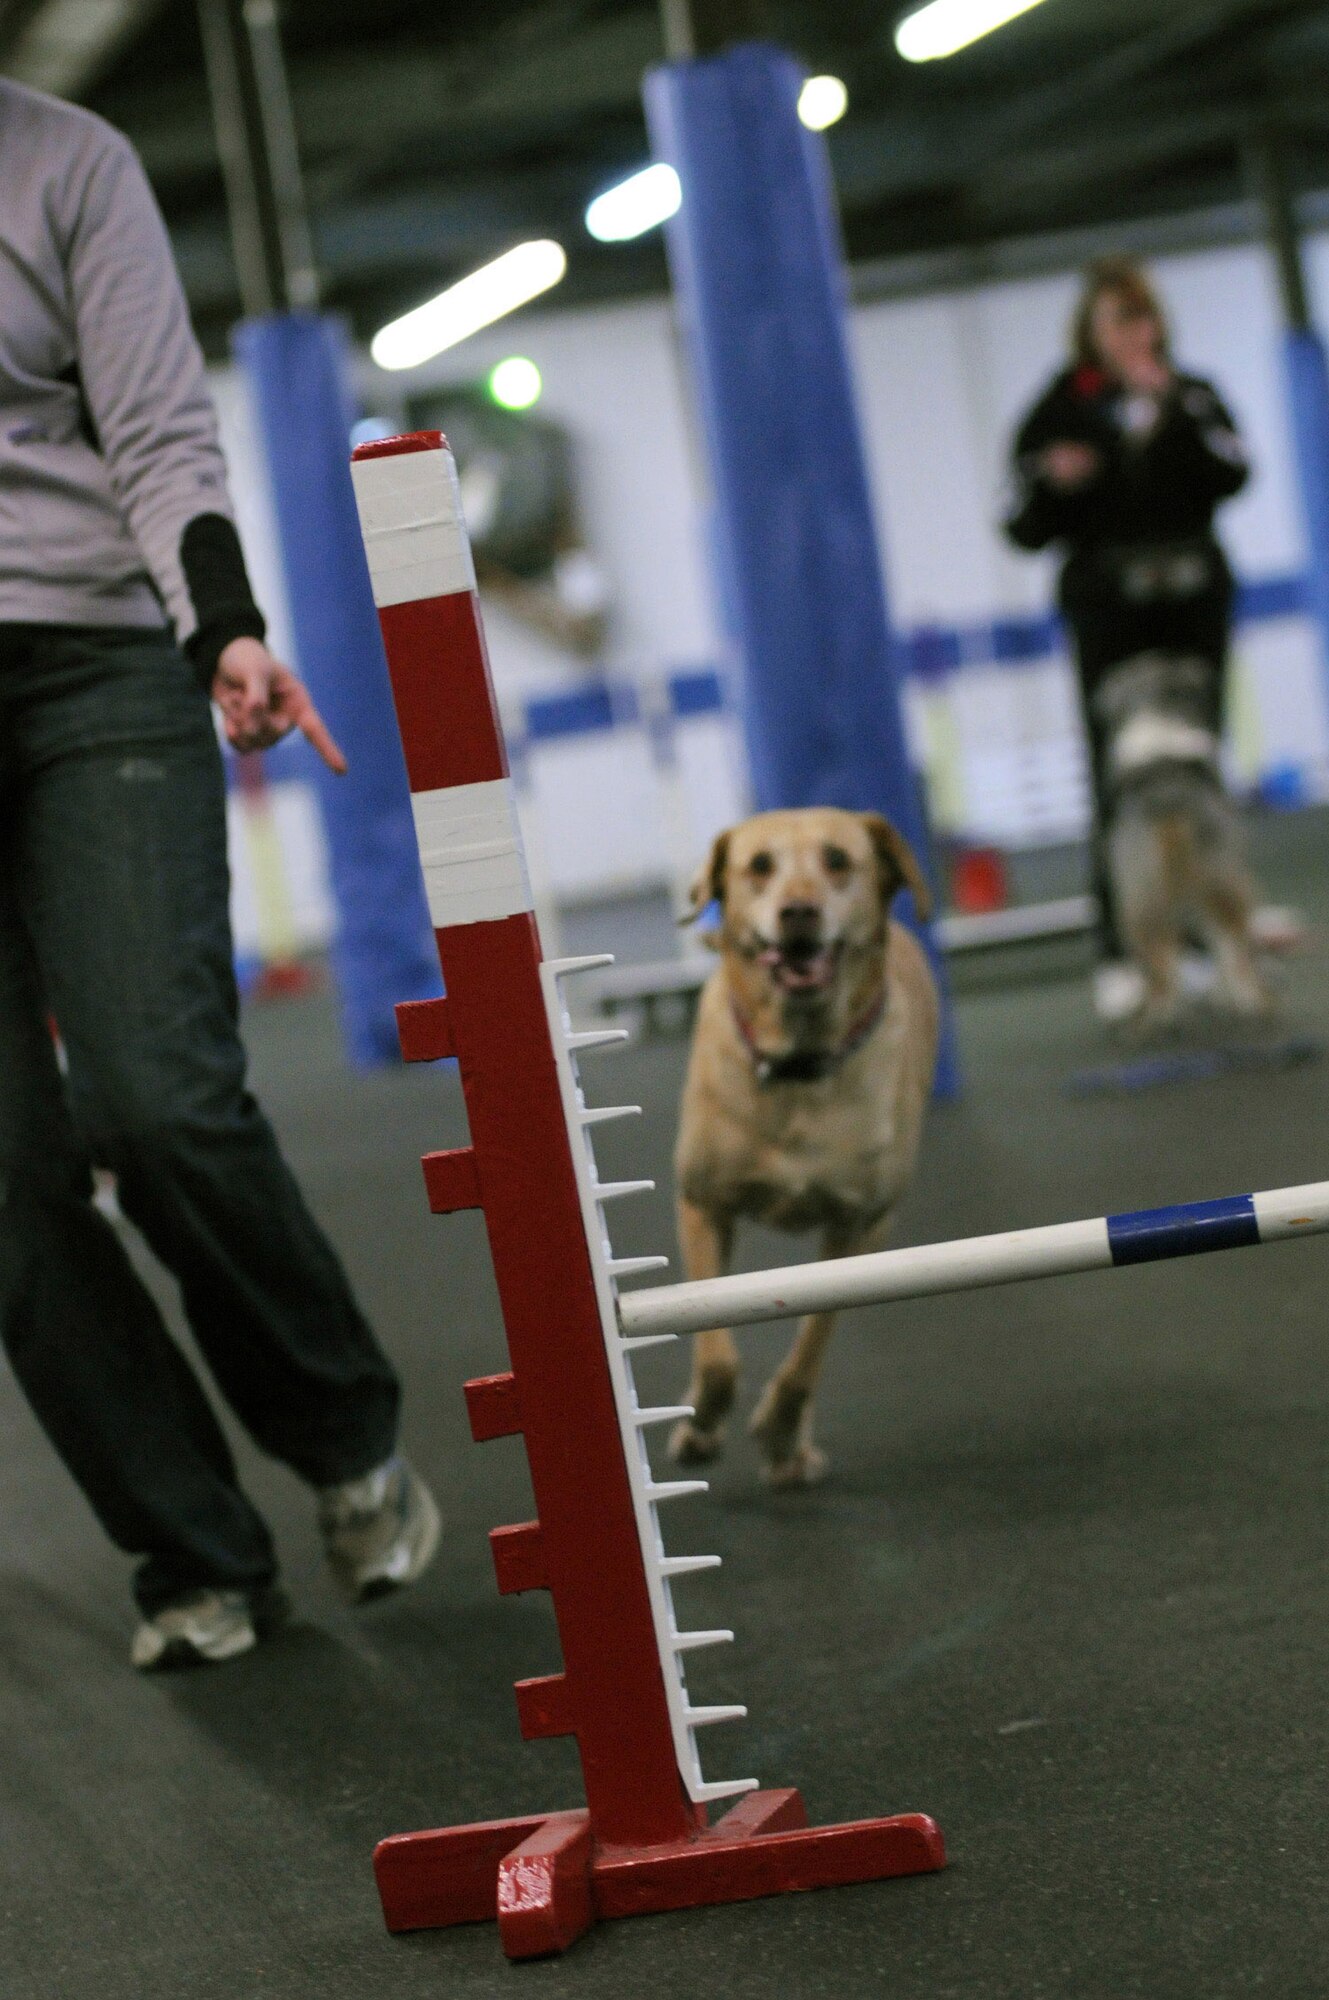 First Lt. Heather Greatting instructs Zoey, her 9-year-old Labrador retriever, to jump over a hurdle Feb. 11 during agillity training.  The lieutenant obtained Zoey from a Labrador rescue center and currently competes with her in canine agility. Lieutenant Greatting is a space intelligence surveillance and reconnaissance systems employment analyst with the National Air and Space Intelligence Center at Wright-Patterson Air Force Base, Ohio. (U.S. Air Force photo/Staff Sgt. Joshua Strang)